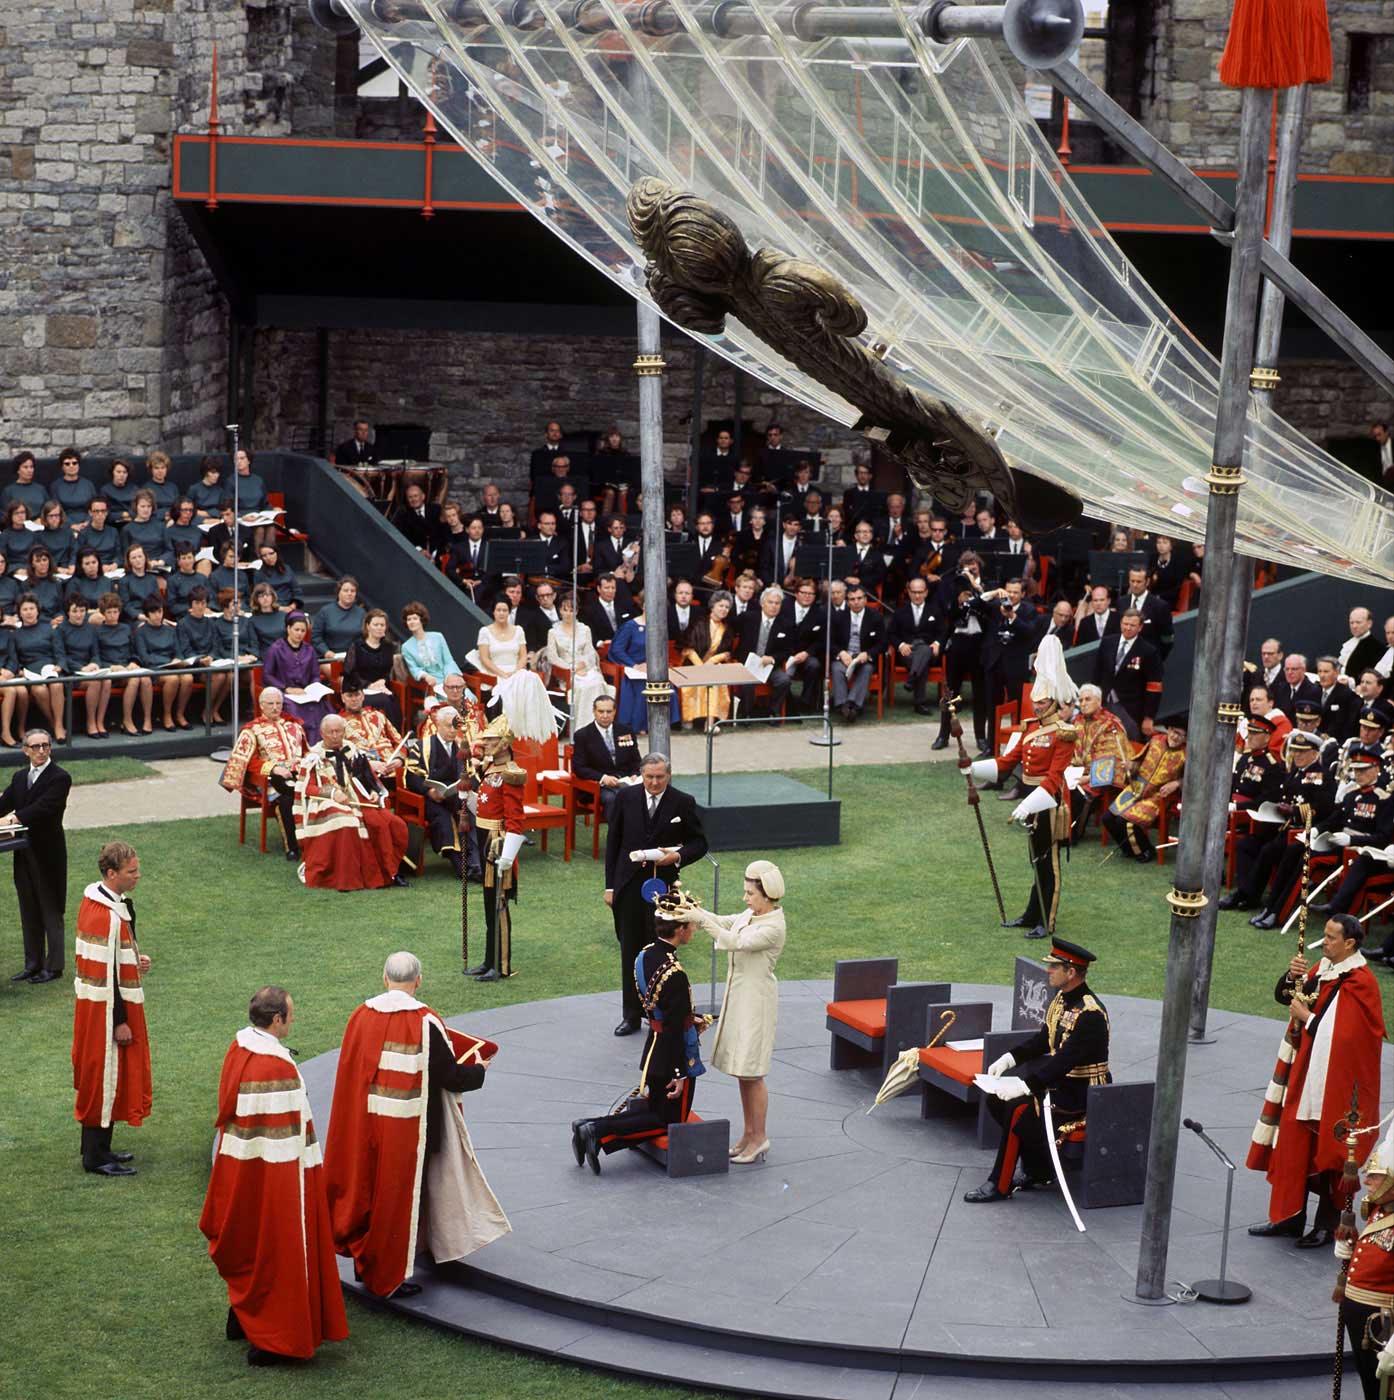 Prince Charles kneels before his mother at Caernarvon Castle on July 1, 1969, during his investiture as the 21st Prince of Wales and Earl of Chester. The title is reserved for the heir apparent to the throne. Charles is the oldest and longest-serving holder of the title.